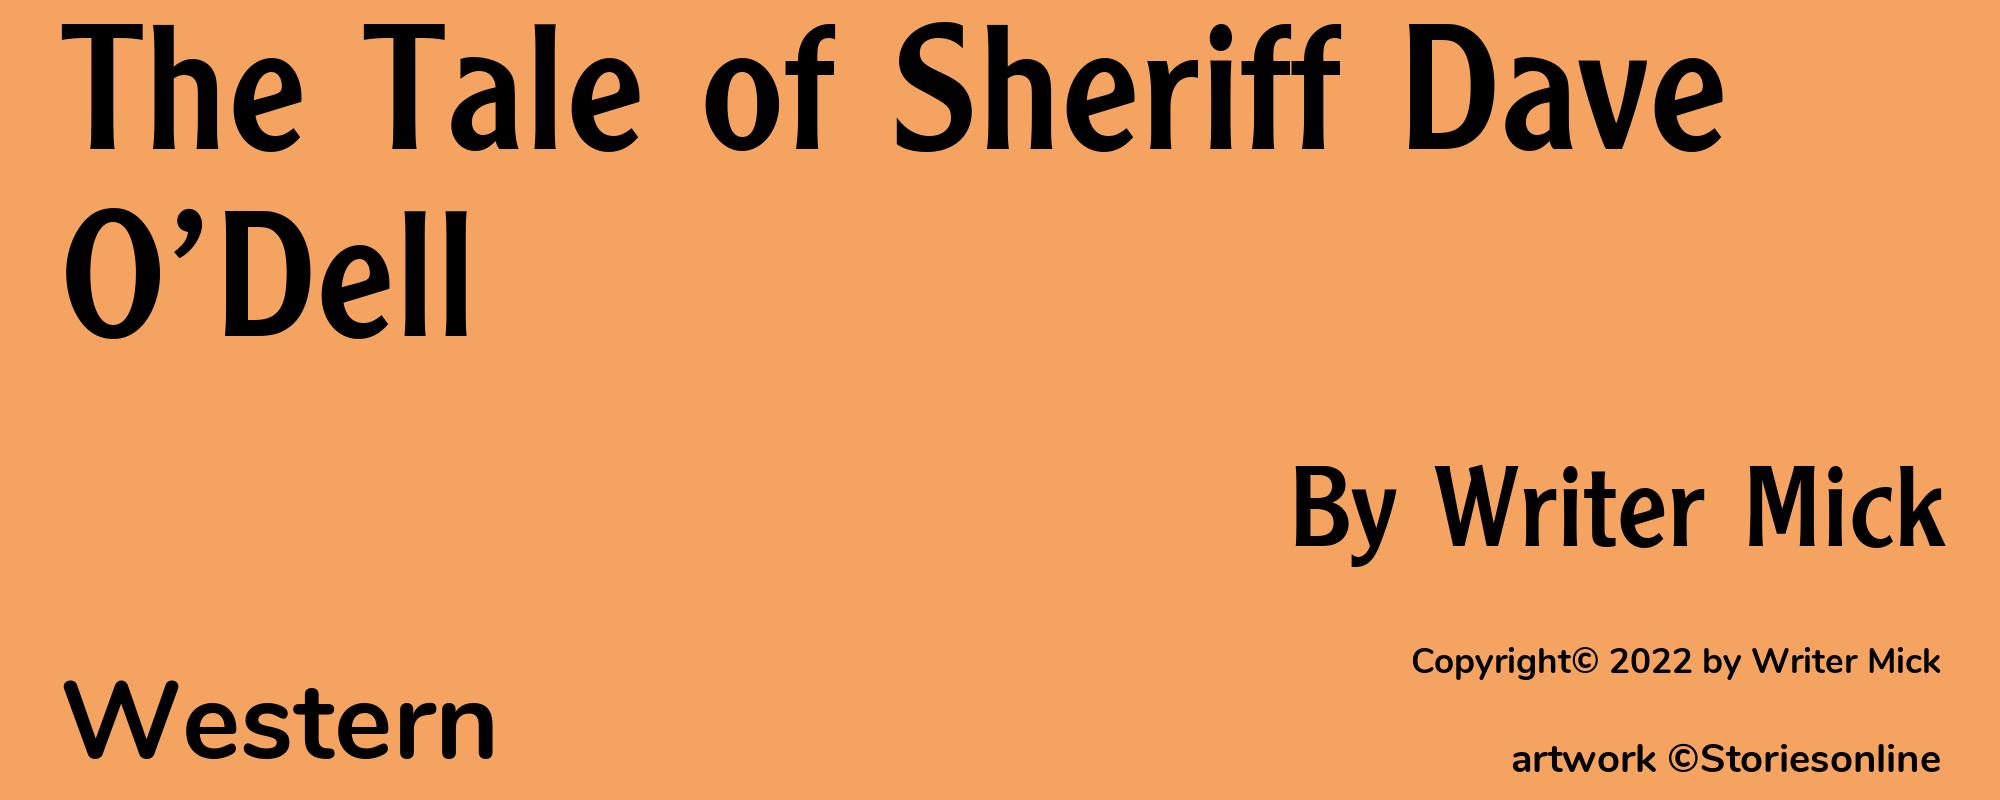 The Tale of Sheriff Dave O’Dell - Cover